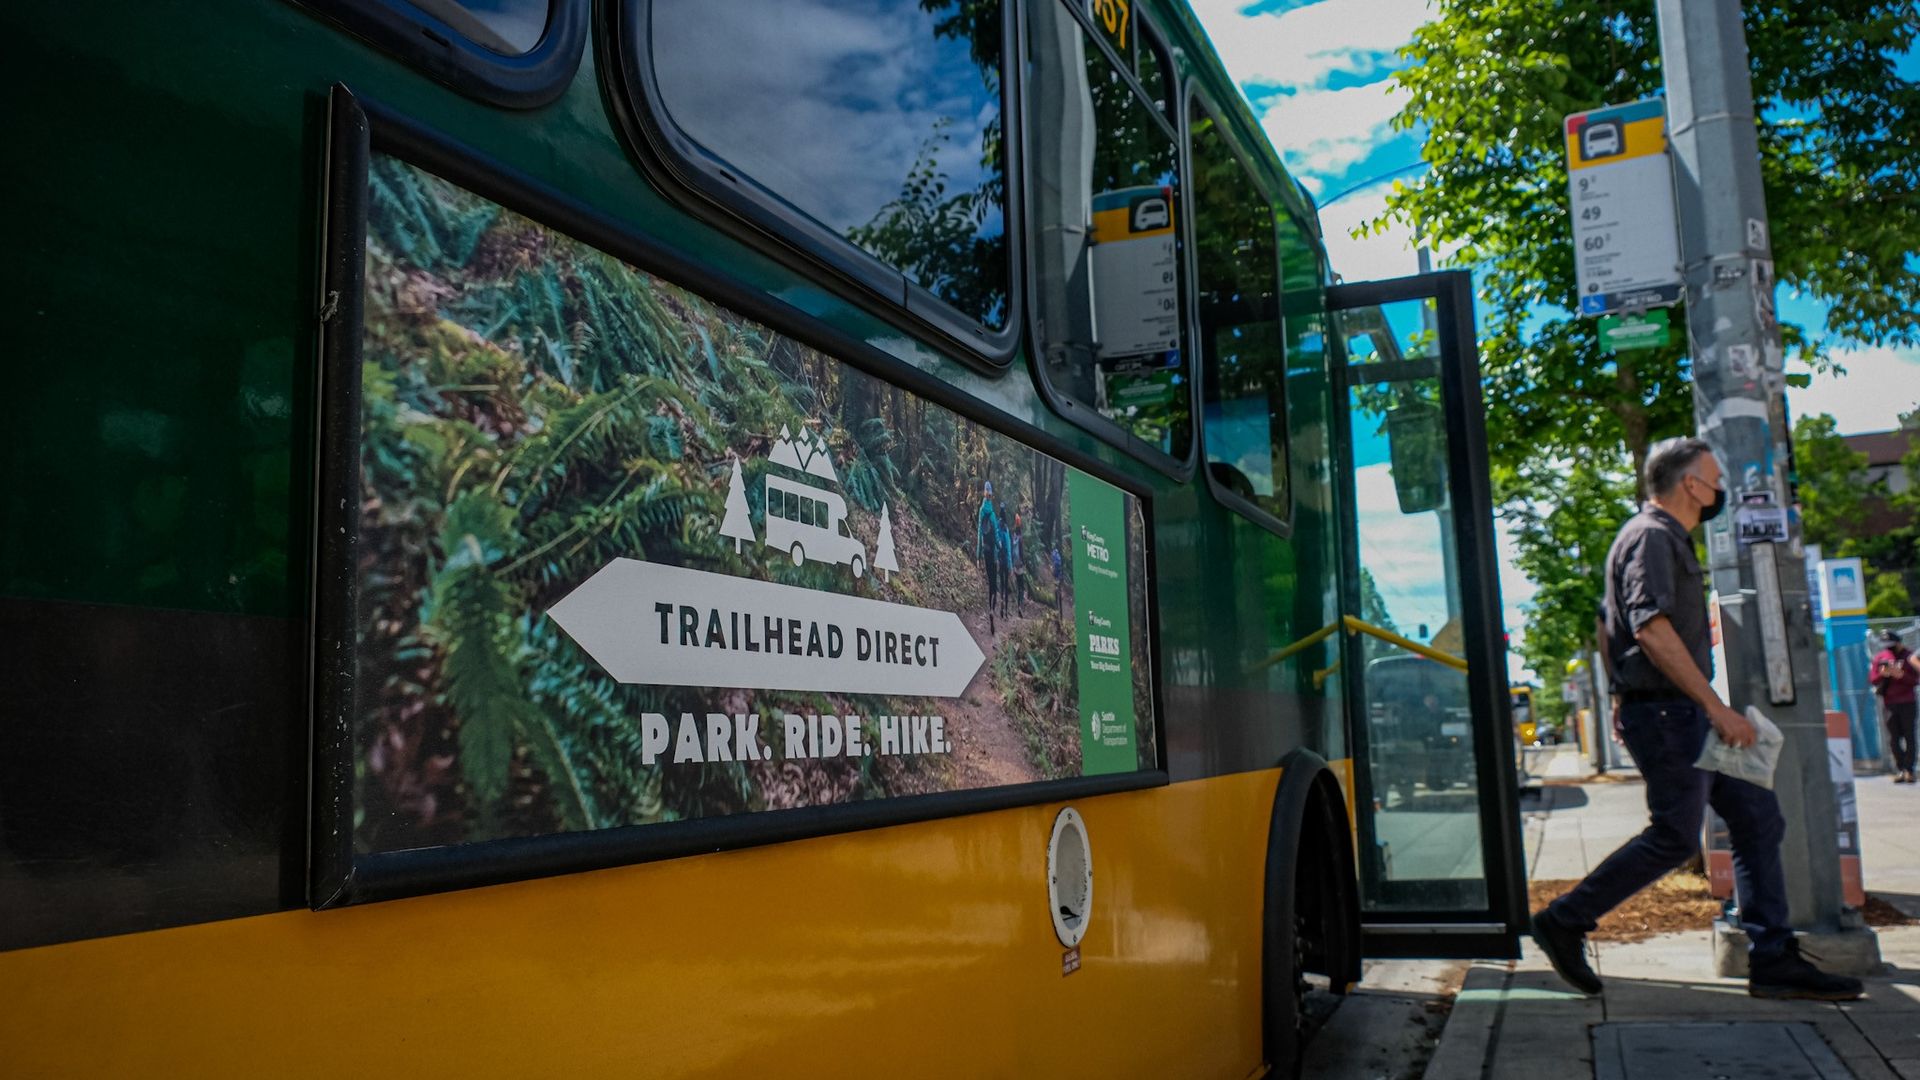 A green and yellow King County metro bus with a sign that says "Trailhead Direct," and a man getting off of the bus onto a curb.